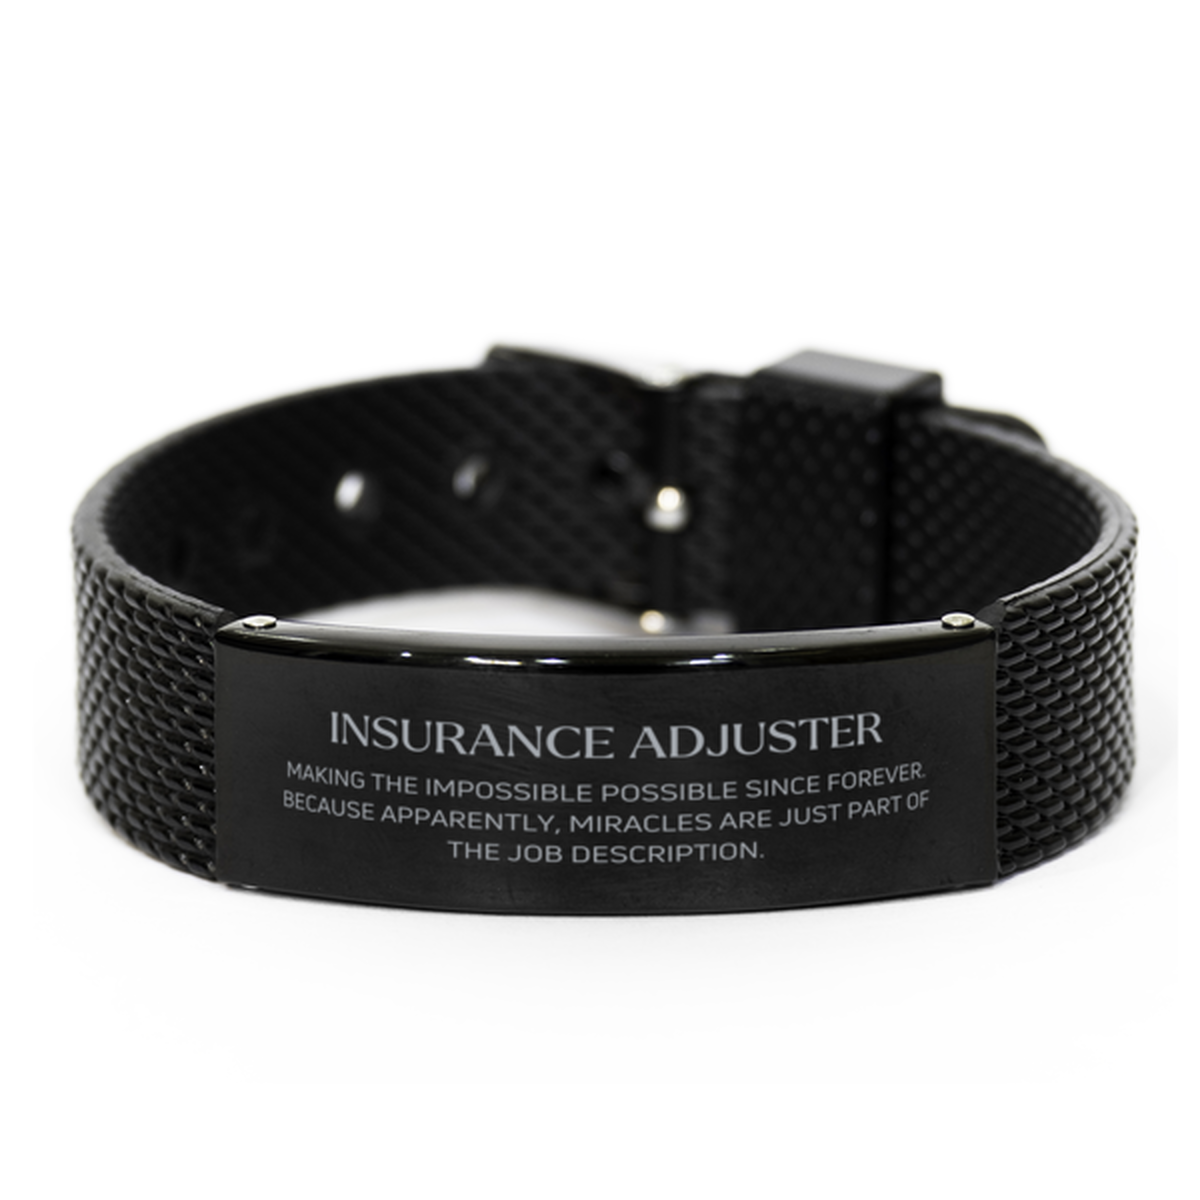 Funny Insurance Adjuster Gifts, Miracles are just part of the job description, Inspirational Birthday Black Shark Mesh Bracelet For Insurance Adjuster, Men, Women, Coworkers, Friends, Boss